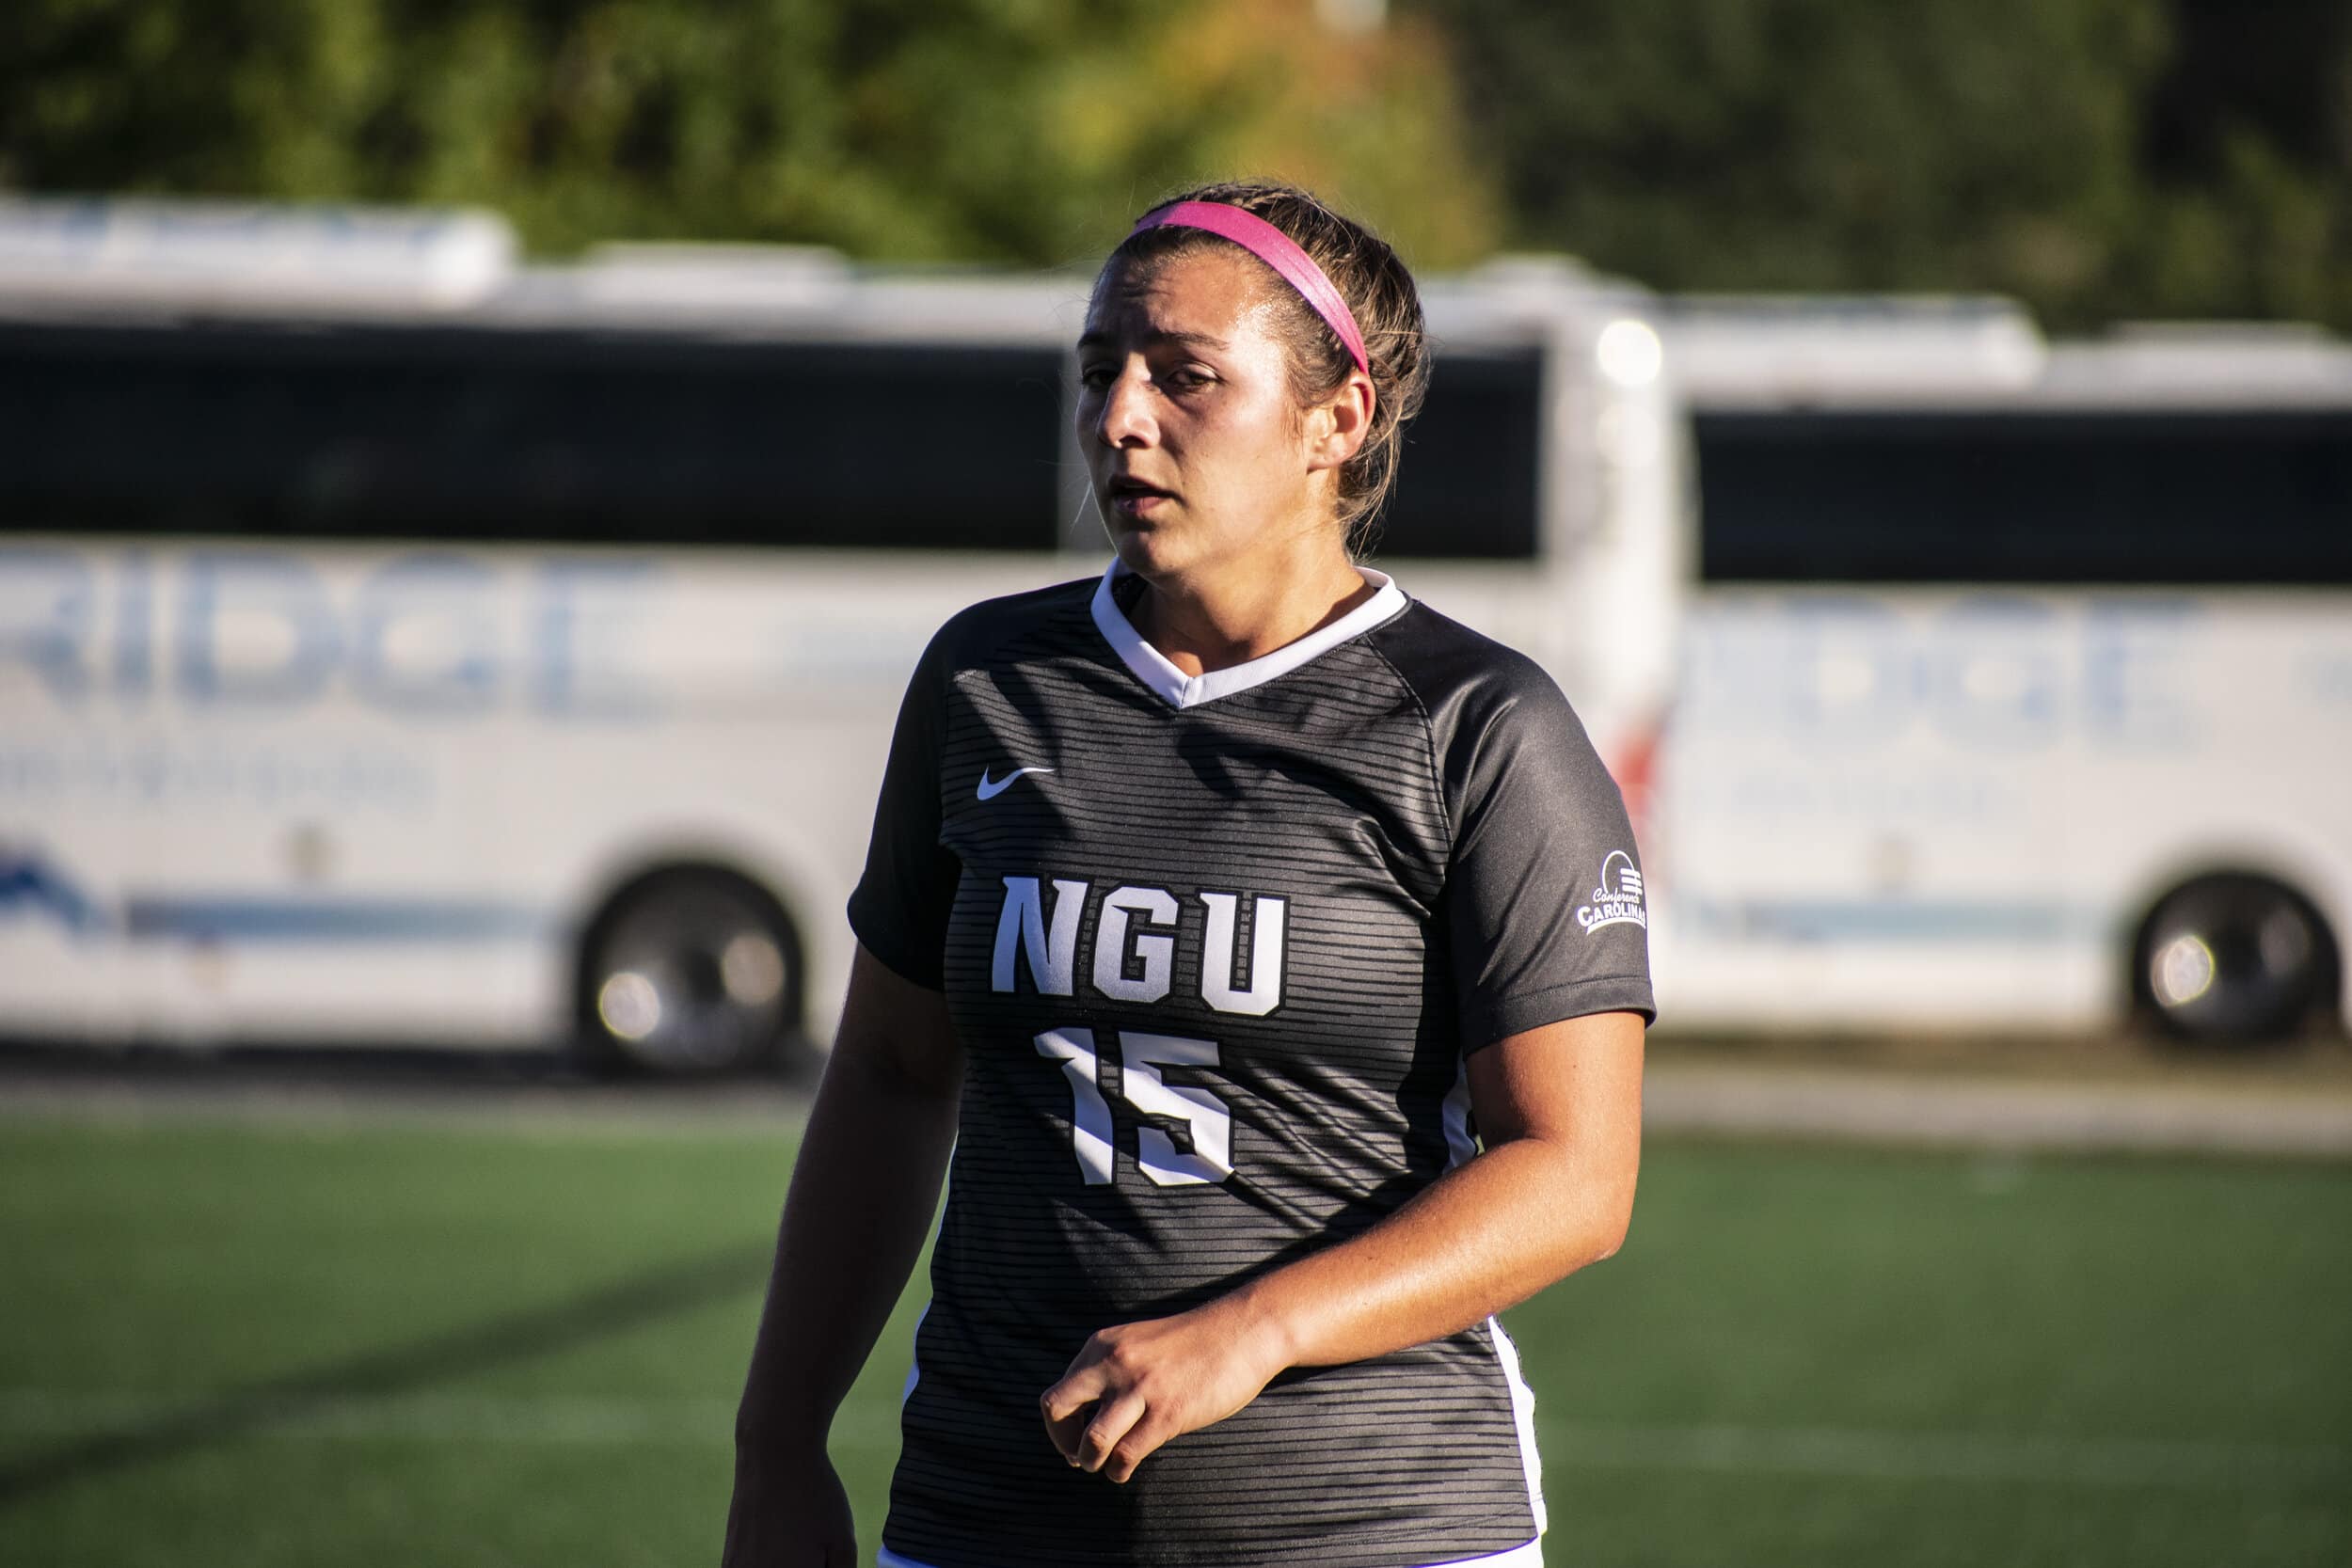 Senior Karly Denaburg (15) waits for the game to resume while NGU is on their offensive positions.